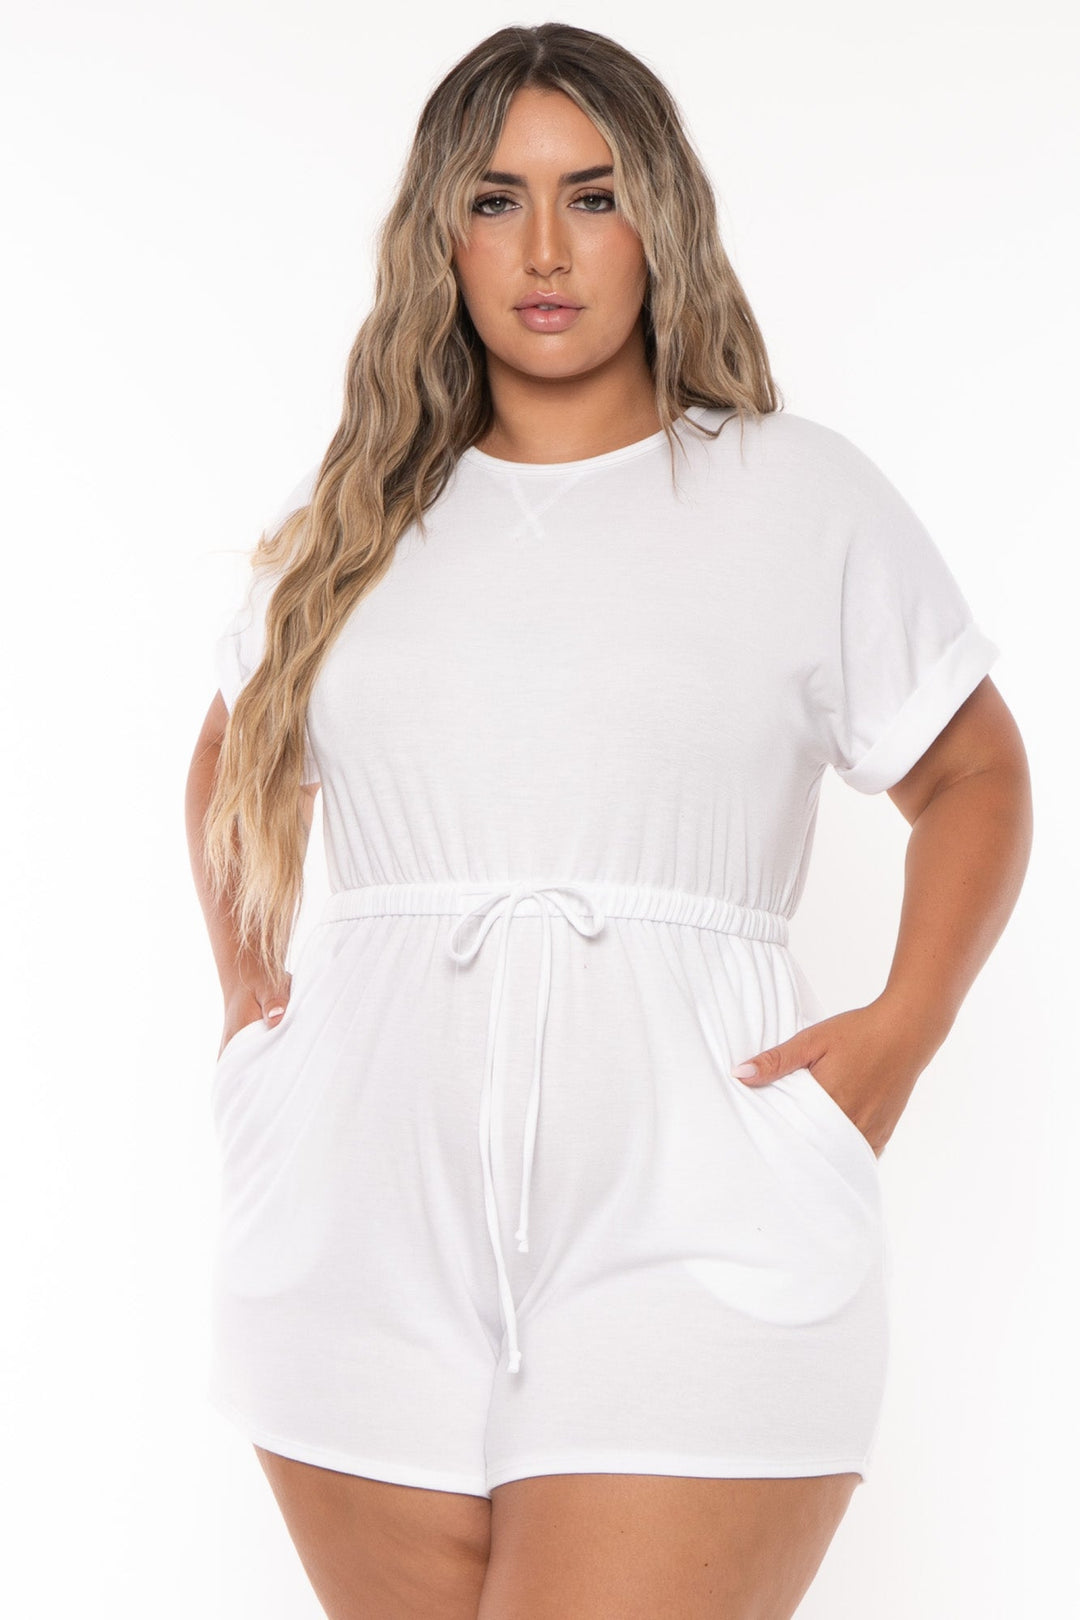 Curvy Sense Jumpsuits and Rompers Plus Size Zenna   Romper - White